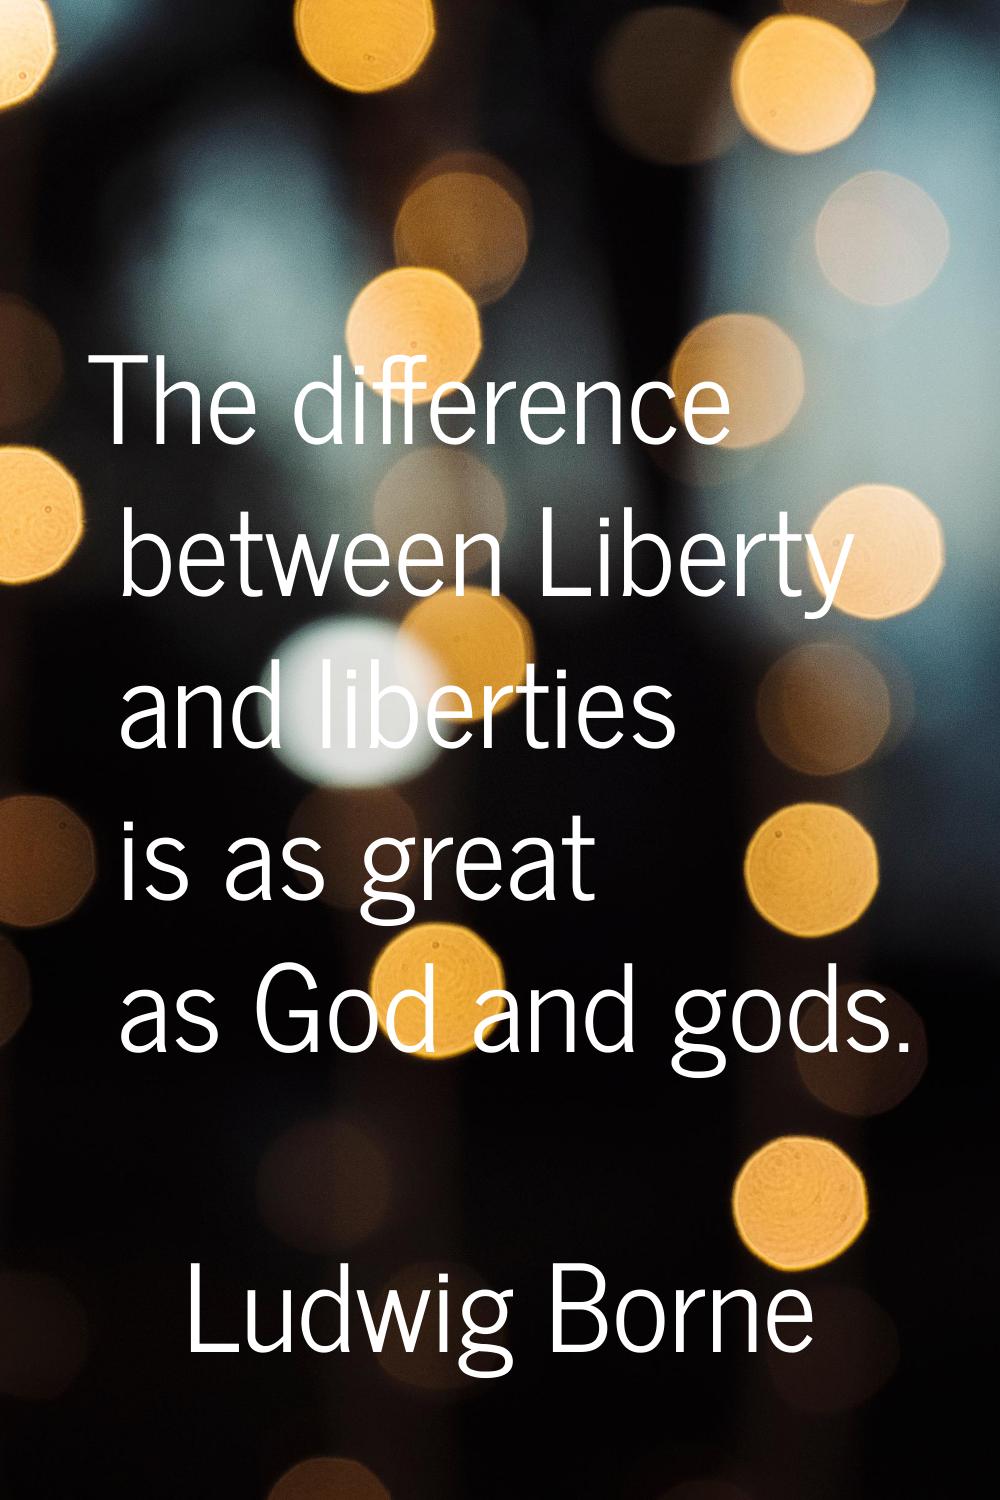 The difference between Liberty and liberties is as great as God and gods.